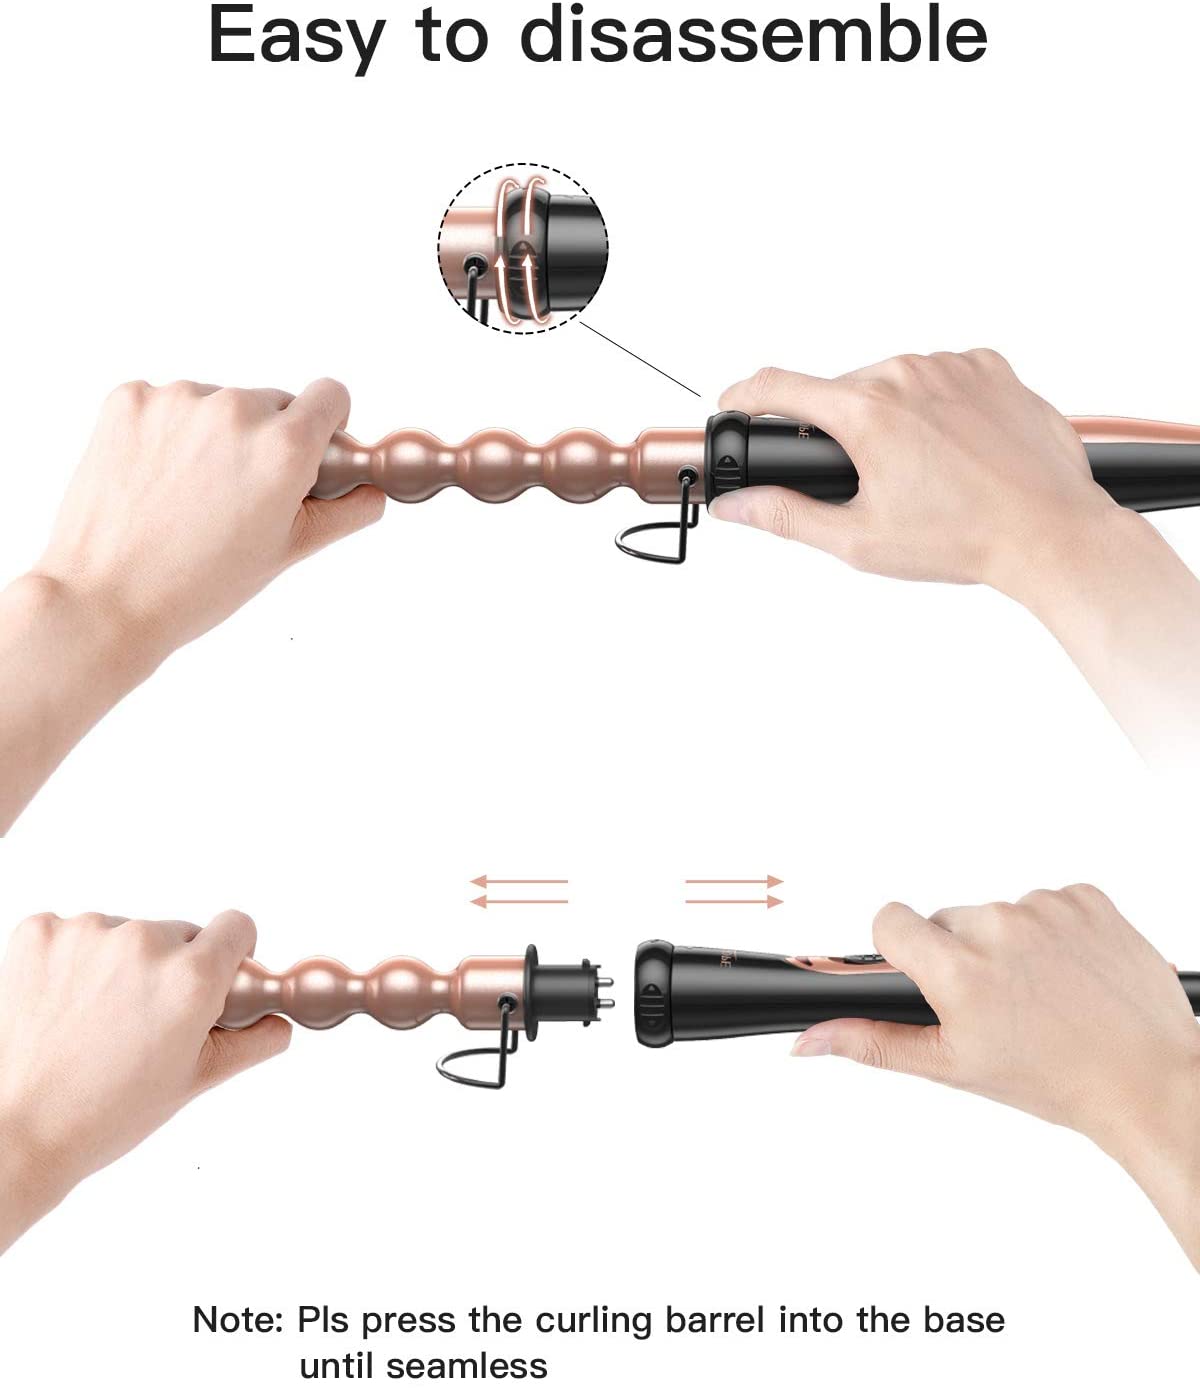 BESTOPE 5 in 1 Professional Curling Iron Wand Set - e4cents